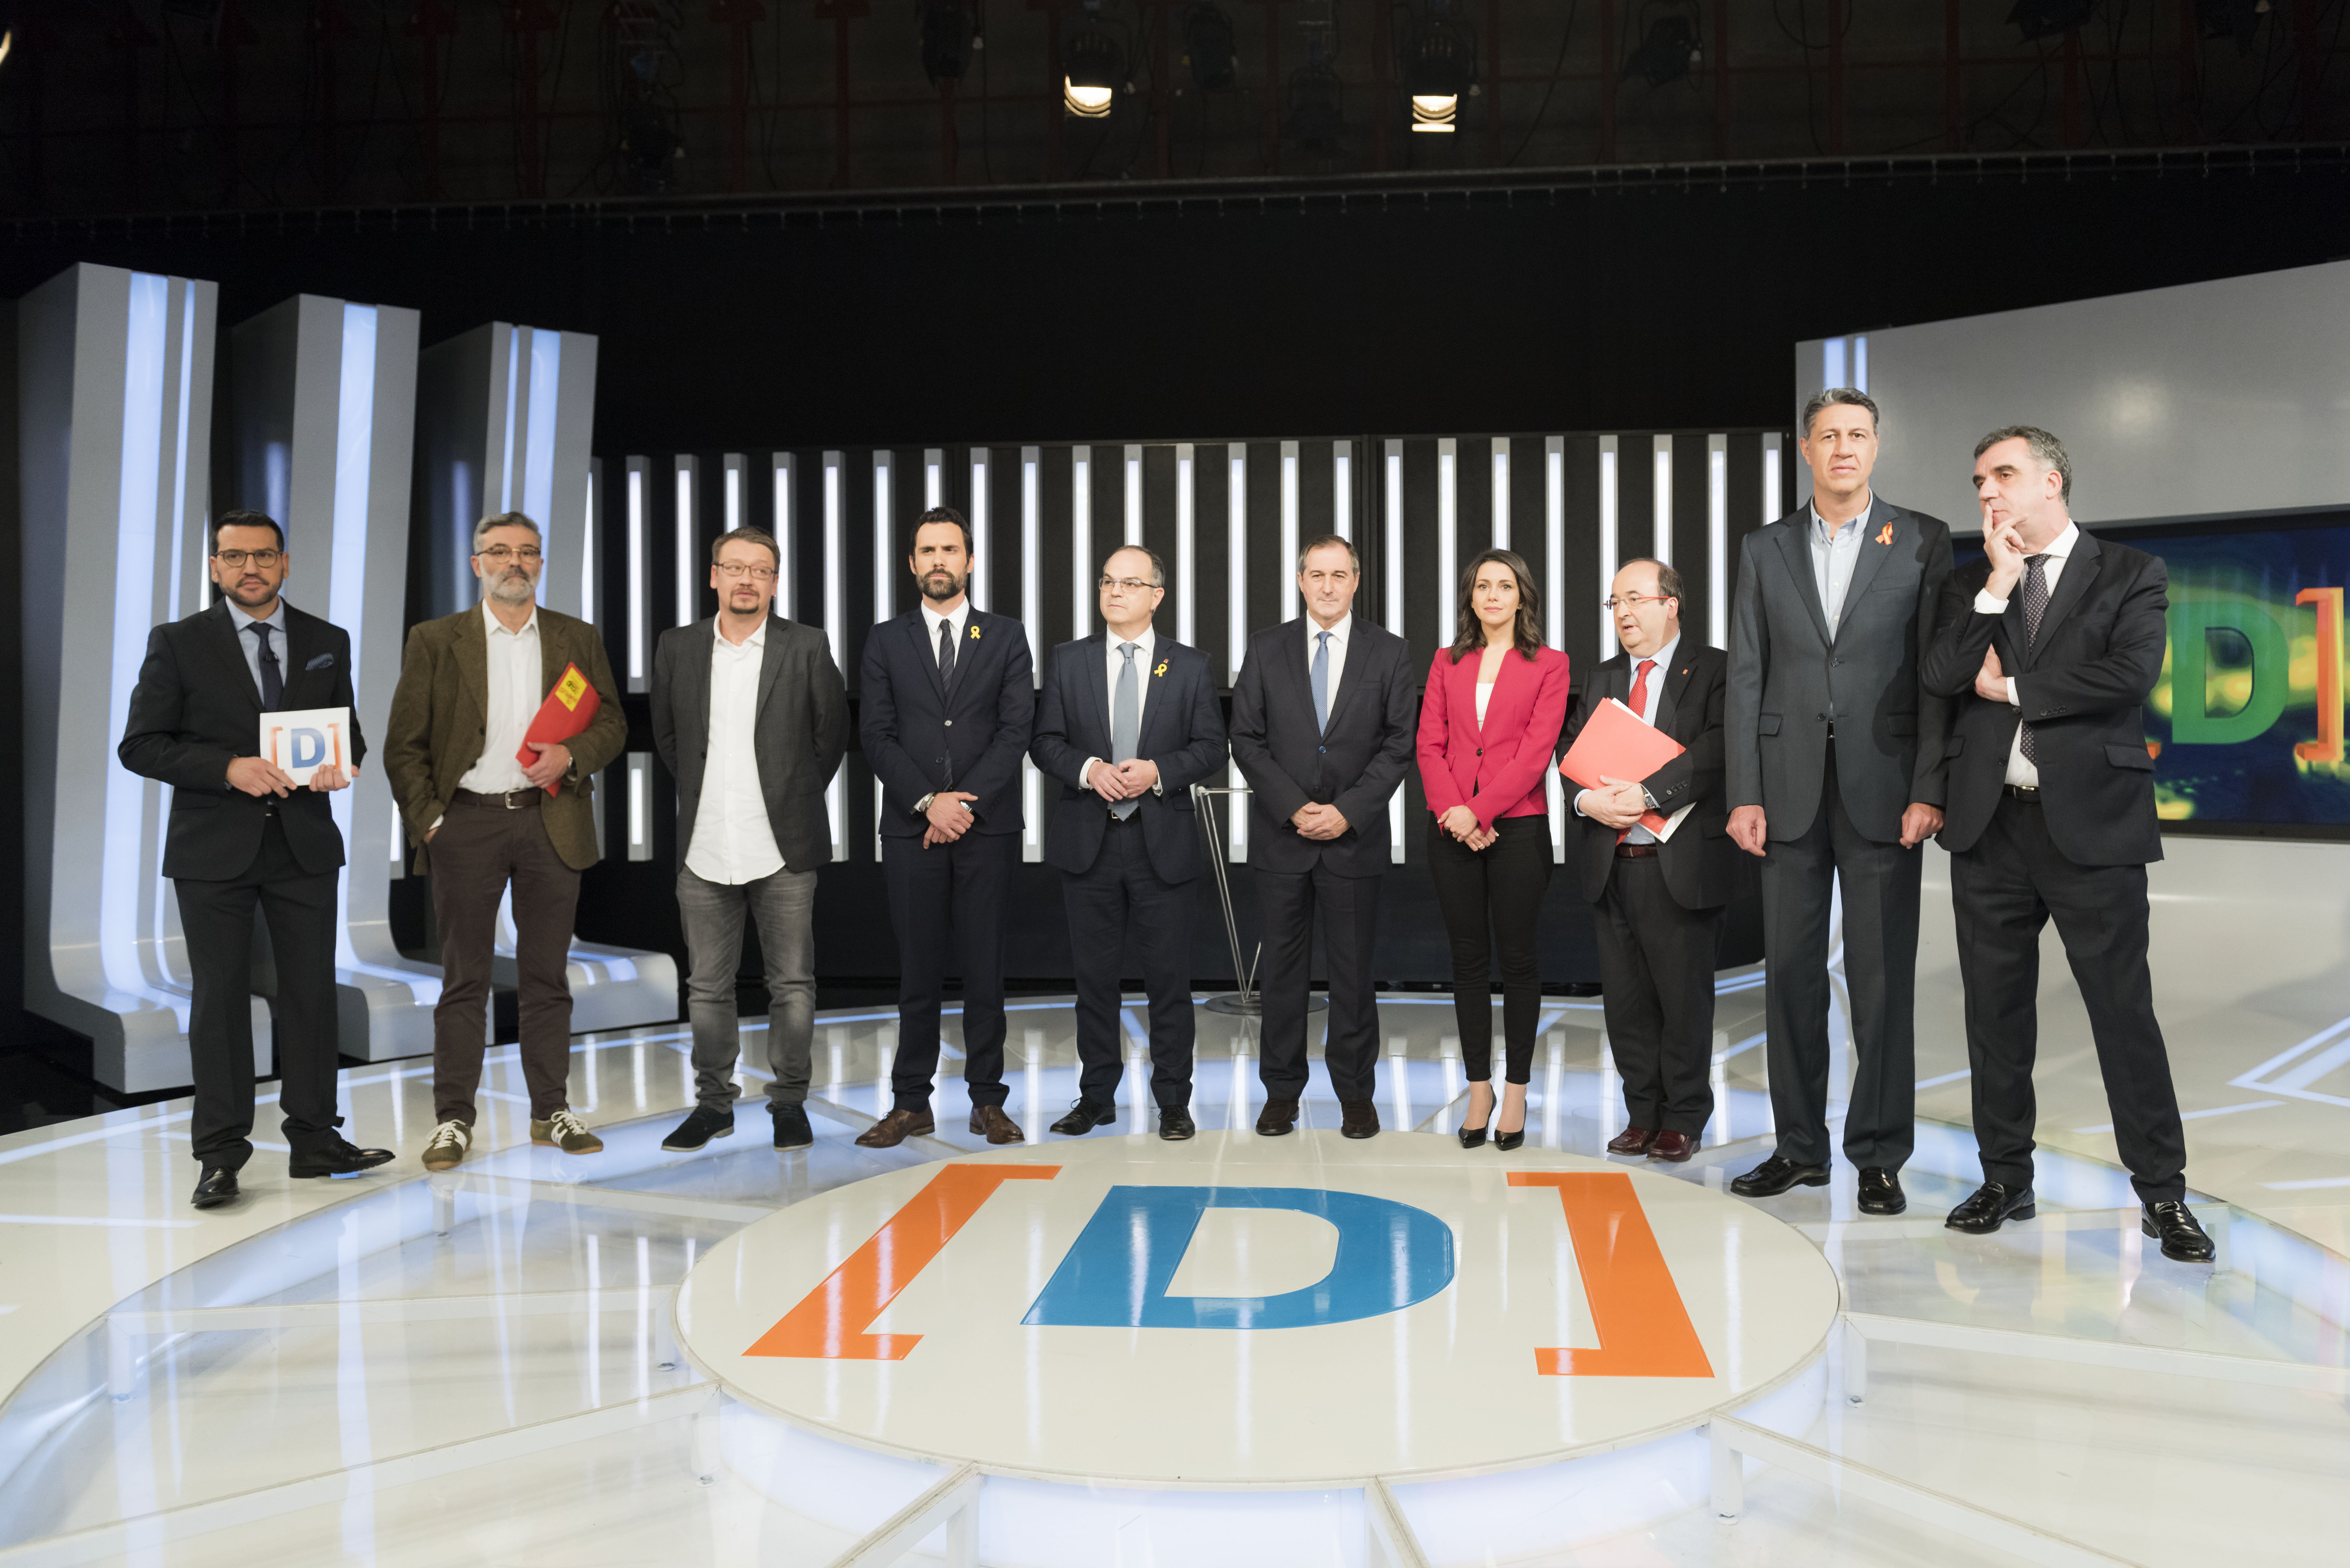 Candidates standing side by side after heated television debate (by ACN)